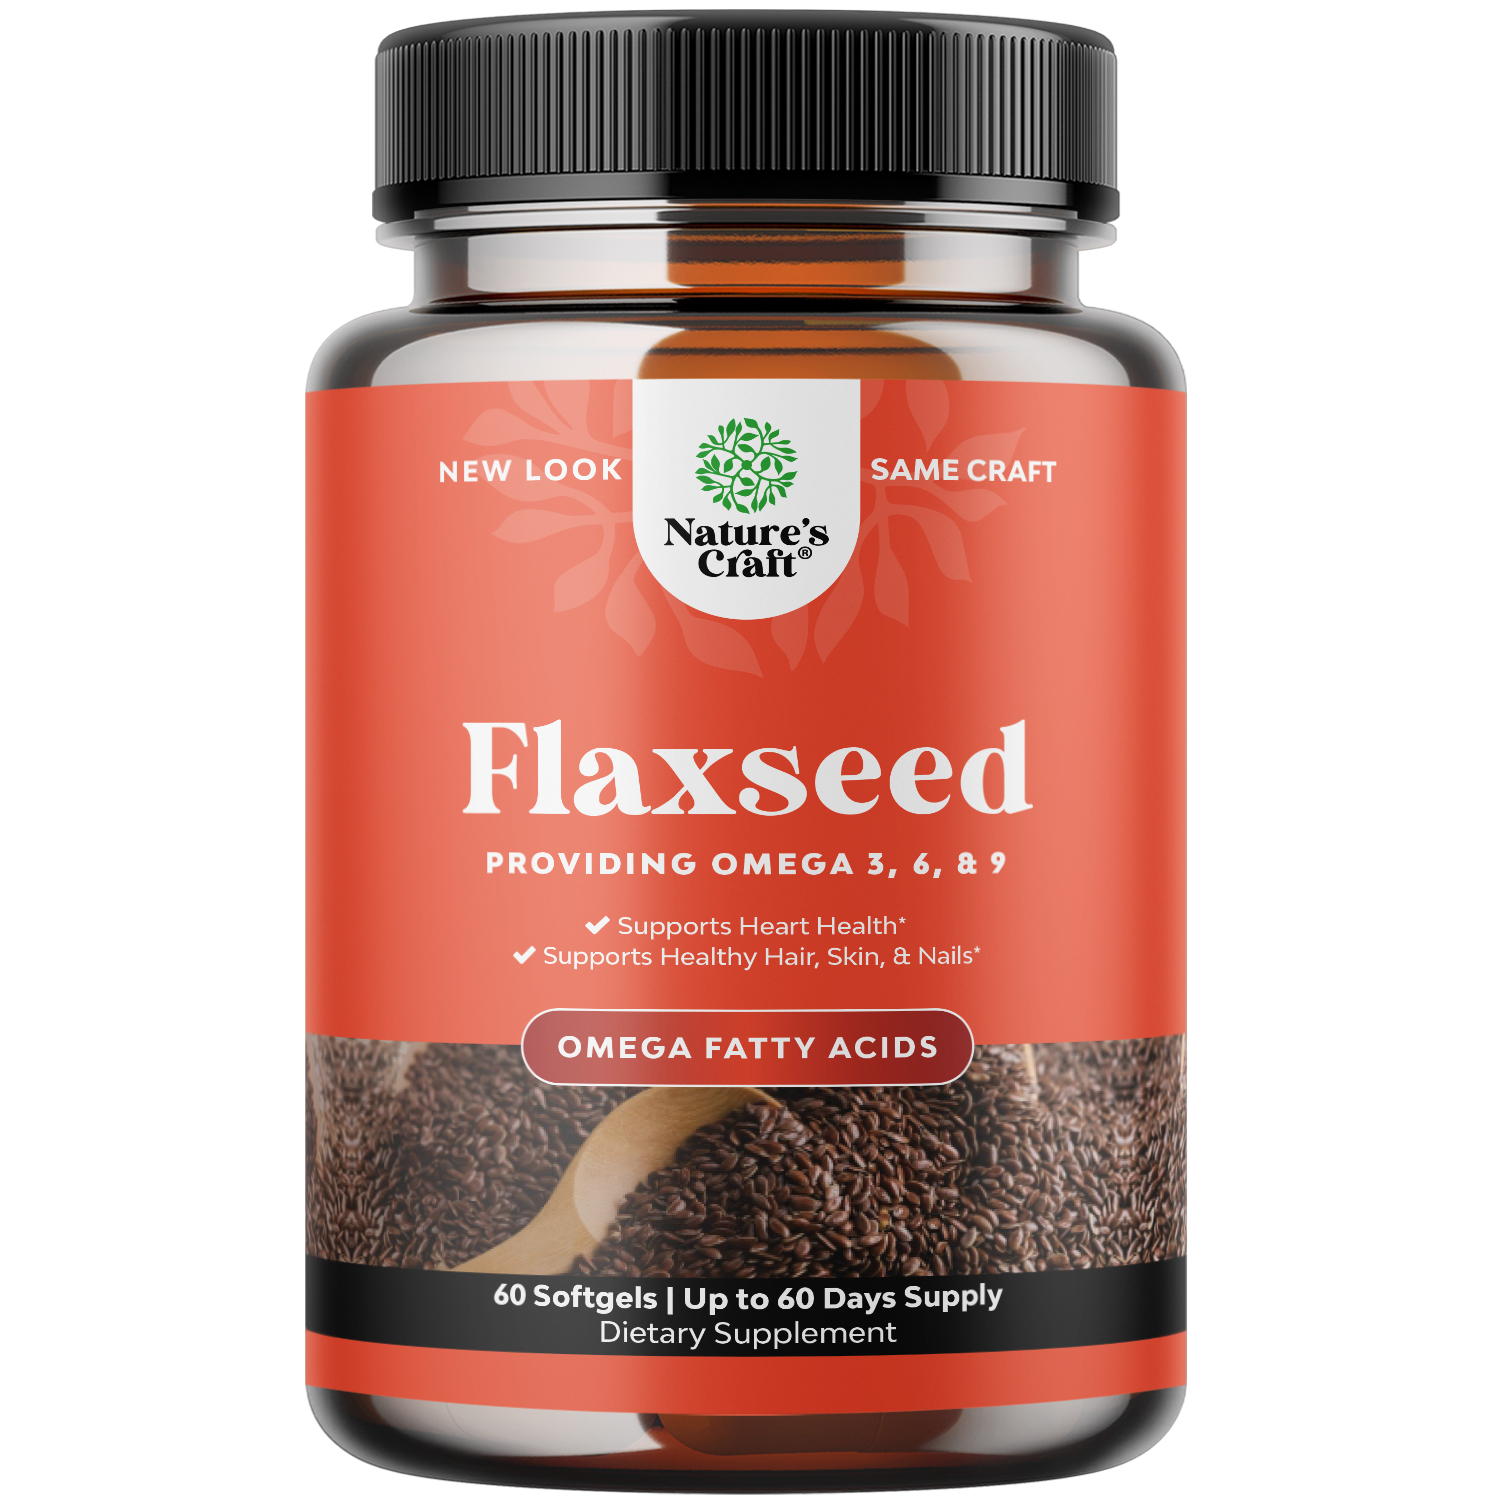 Omega Flaxseed Oil 1000mg per serving - Flax Seed Oil Softgel for Brain Support Constipation Relief Cycle Support and Heart Health Supplement - Natural Omega 3 6 9 Supplement for Hair Skin and Nails - image 1 of 9